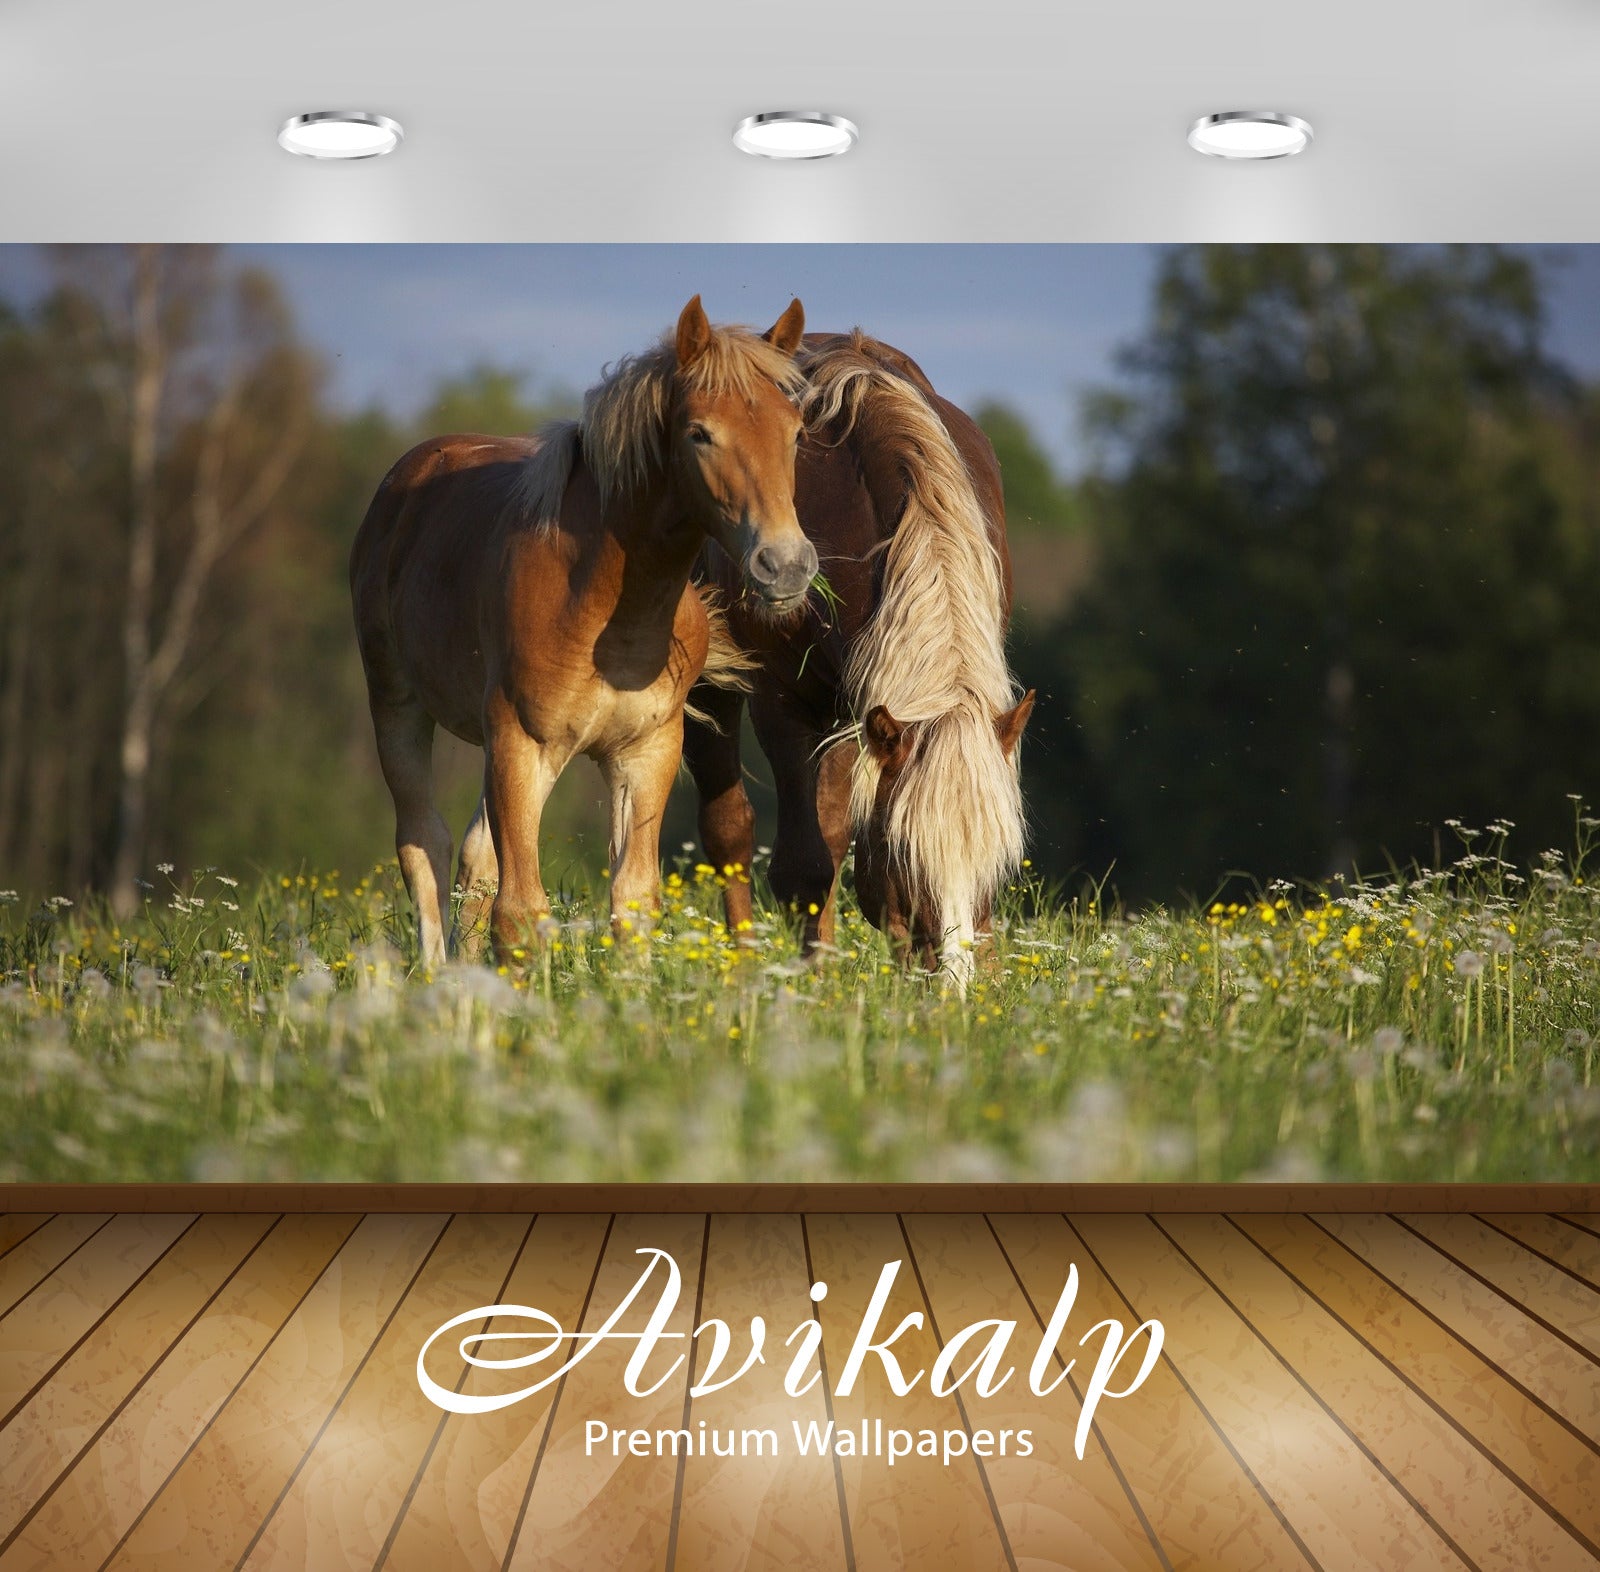 Avikalp Exclusive Awi1951 Horse Full HD Wallpapers for Living room, Hall, Kids Room, Kitchen, TV Bac